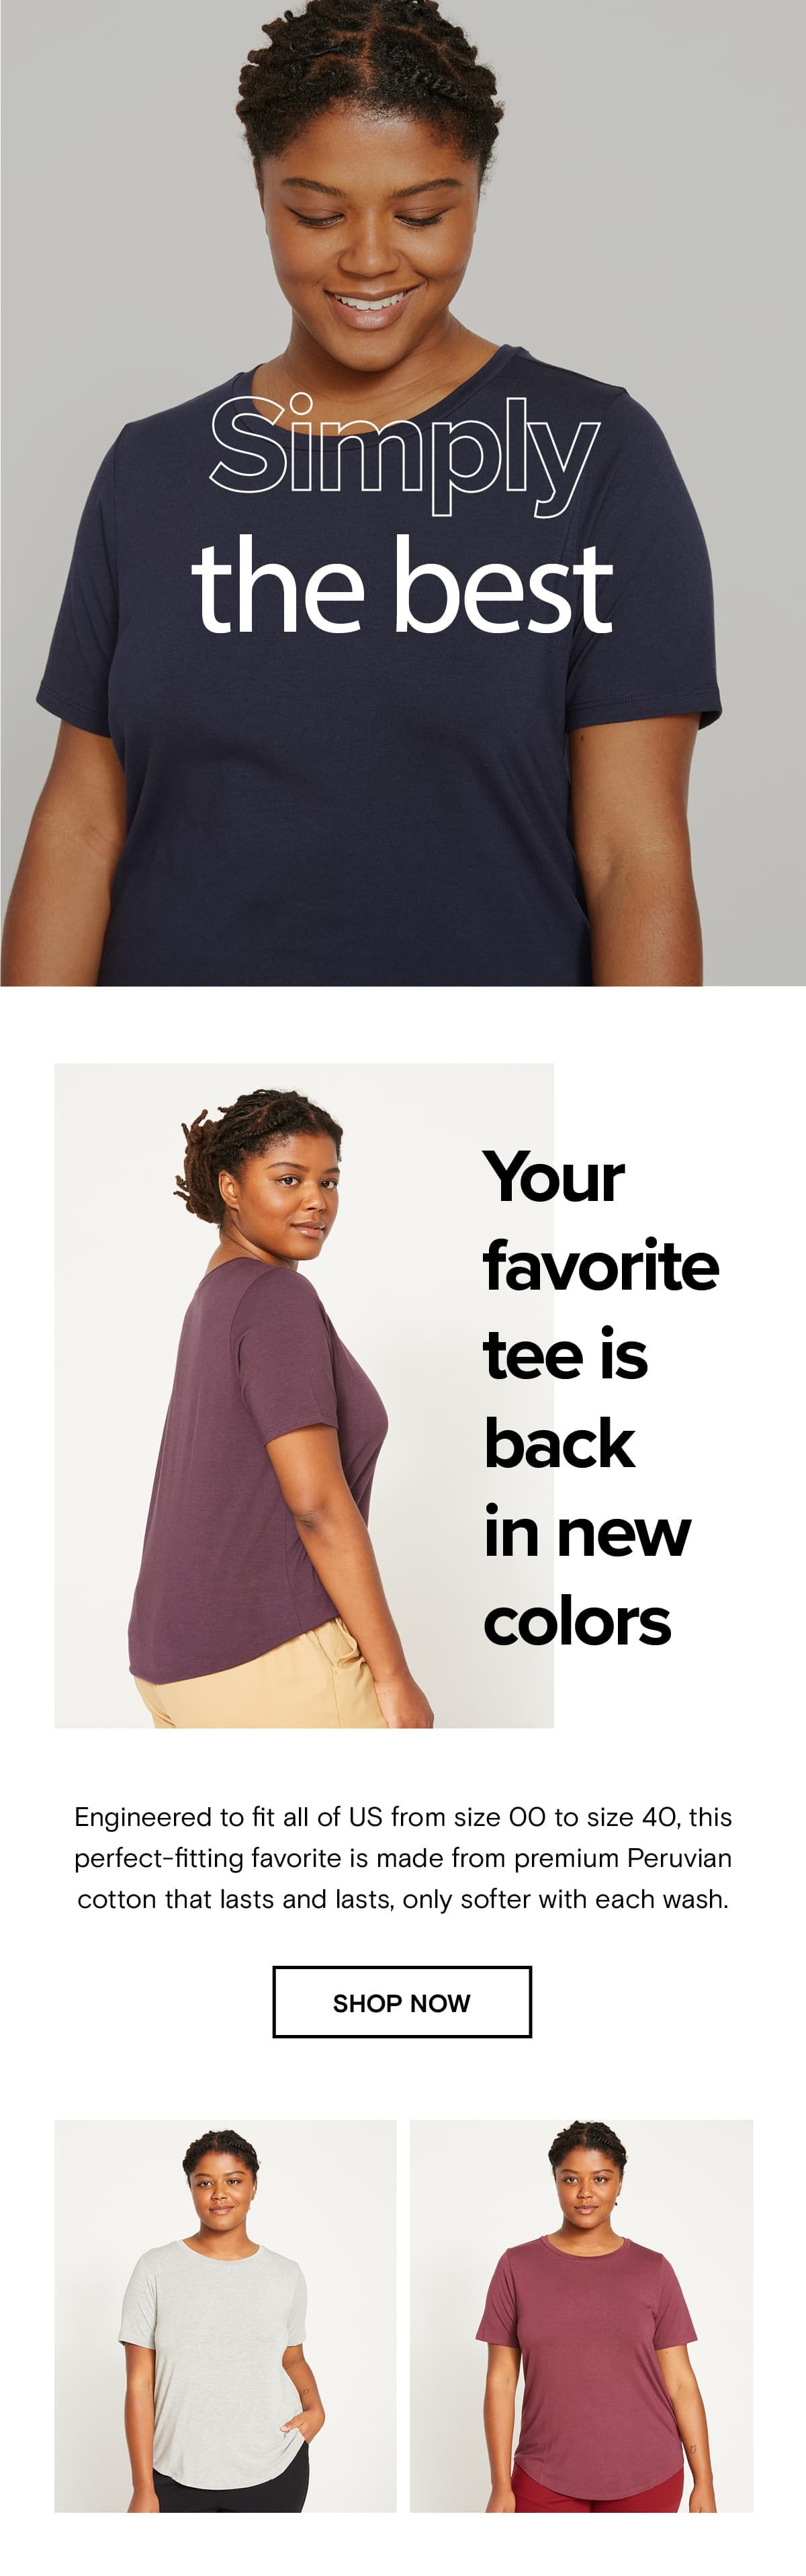 Your favorite tee is back in new colors. Engineered to fit all of US from size 00 to size 40, this perfect-fitting favorite is made from premium Peruvian cotton that lasts and lasts, only softer with each wash.